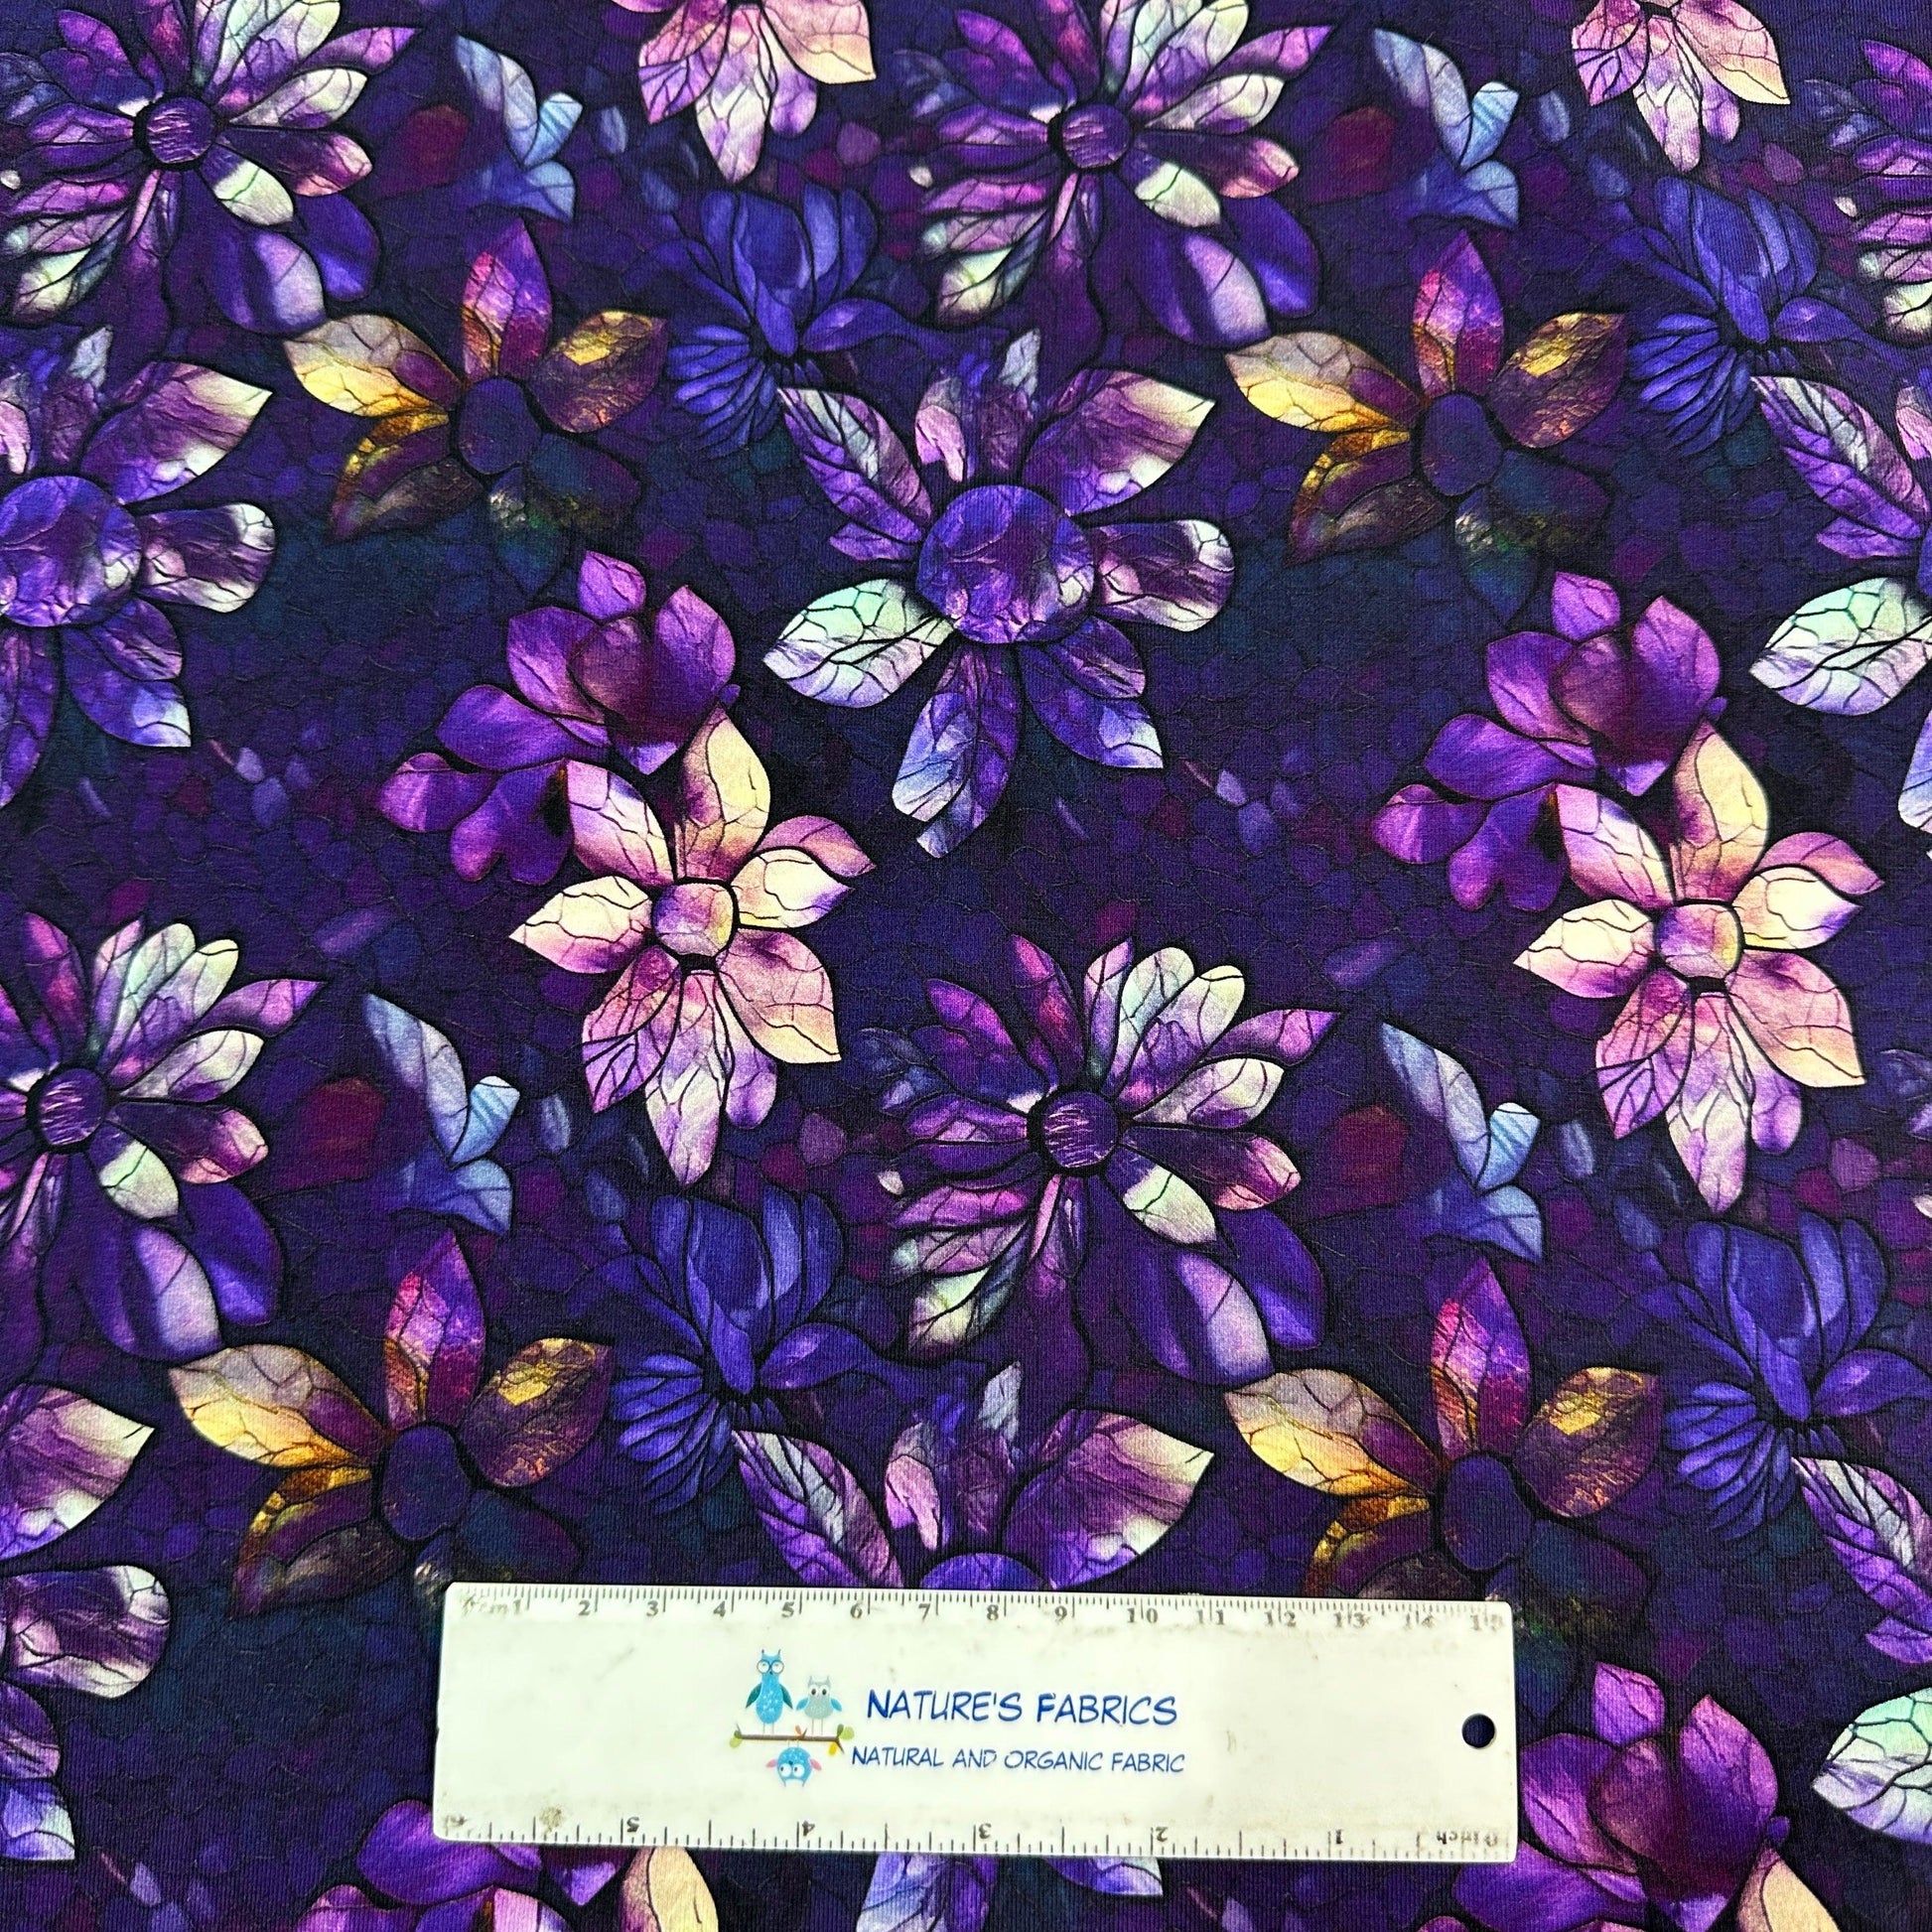 Stained Glass Purple Flowers on Bamboo/Spandex Jersey Fabric - Nature's Fabrics